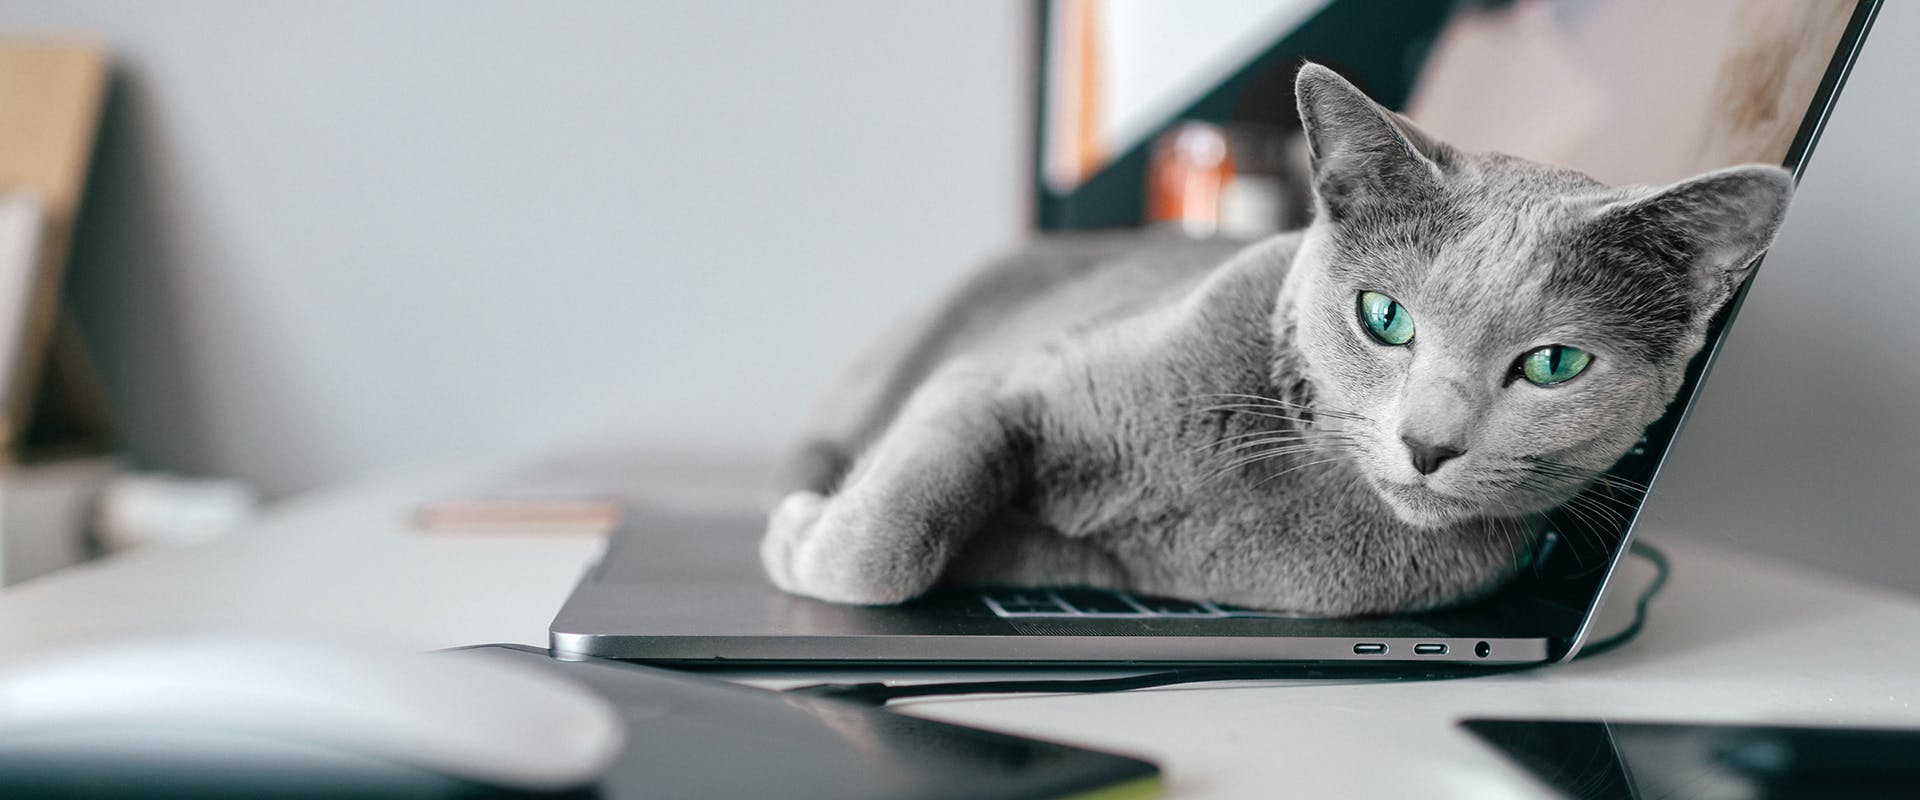 A Russian Blue cat sitting on top of an open laptop